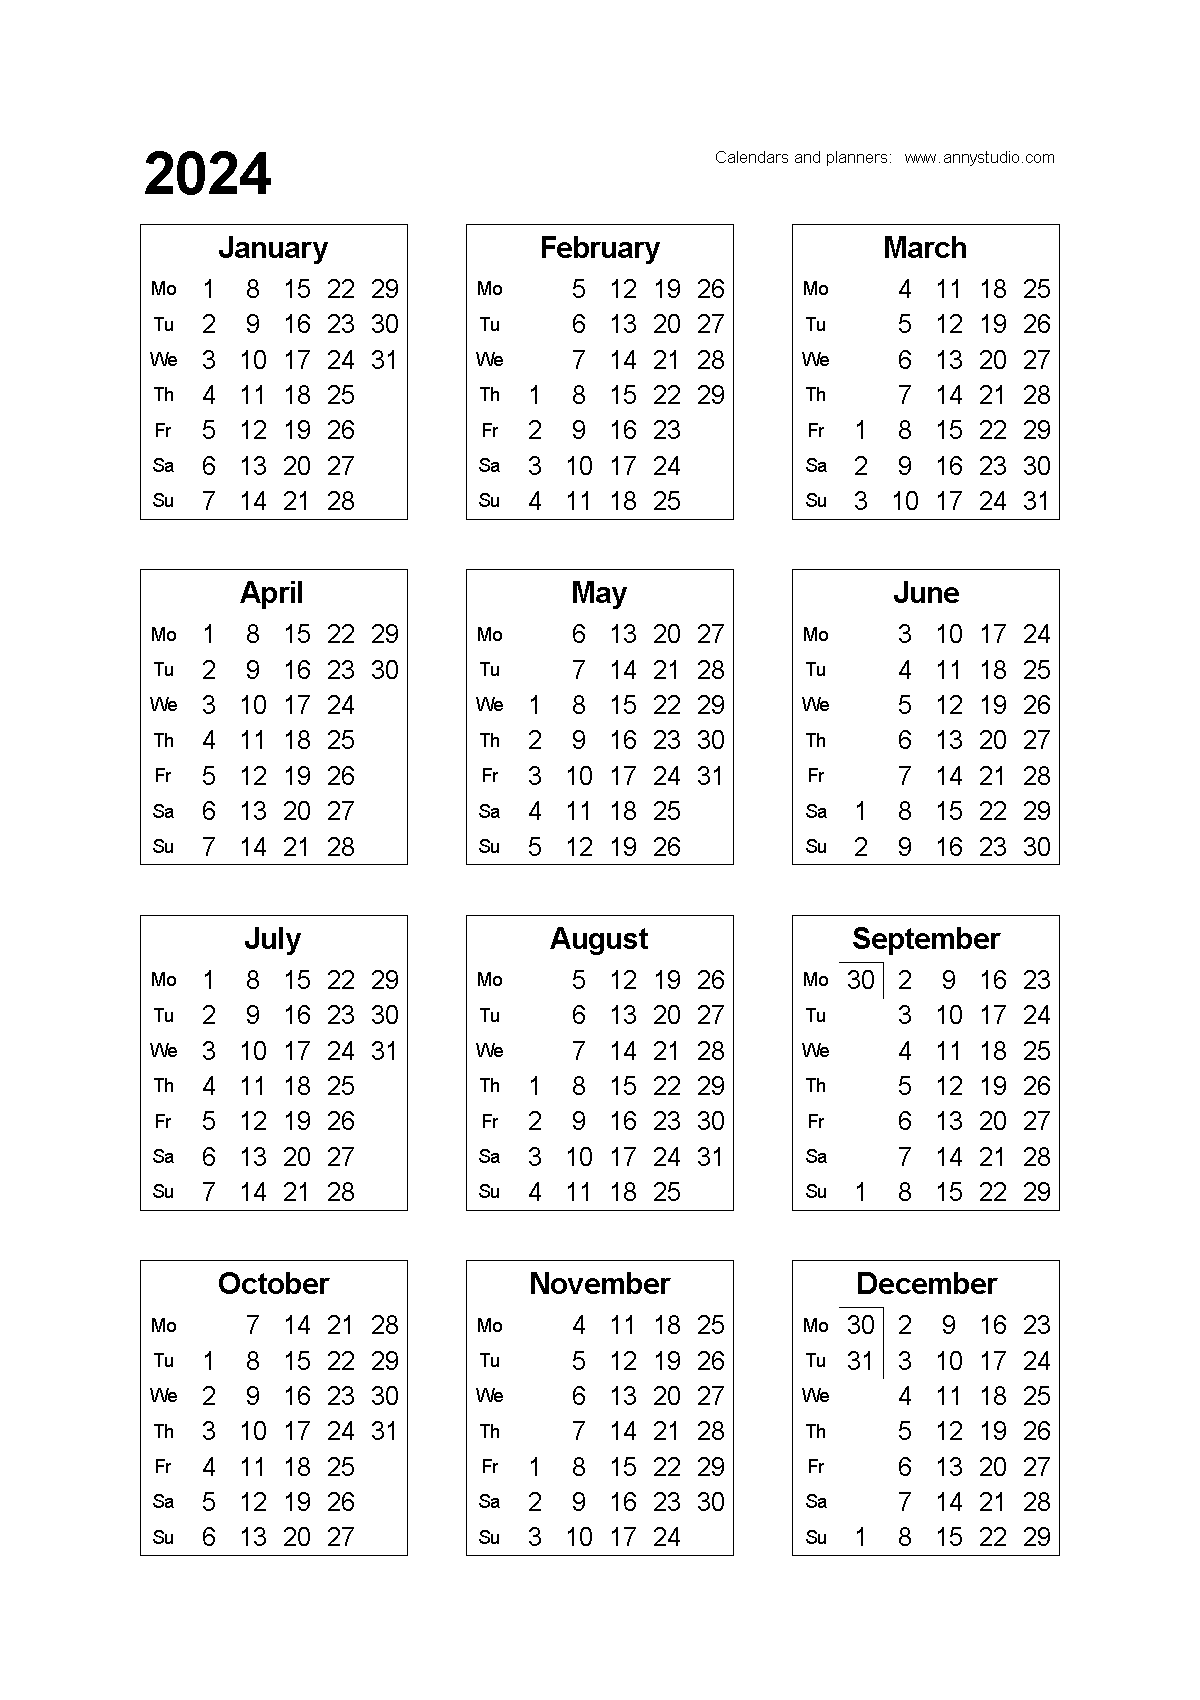 Free Printable Calendars And Planners 2024, 2025 And 2026 with Free Printable Calendar 2024 With Holidays 2 Column